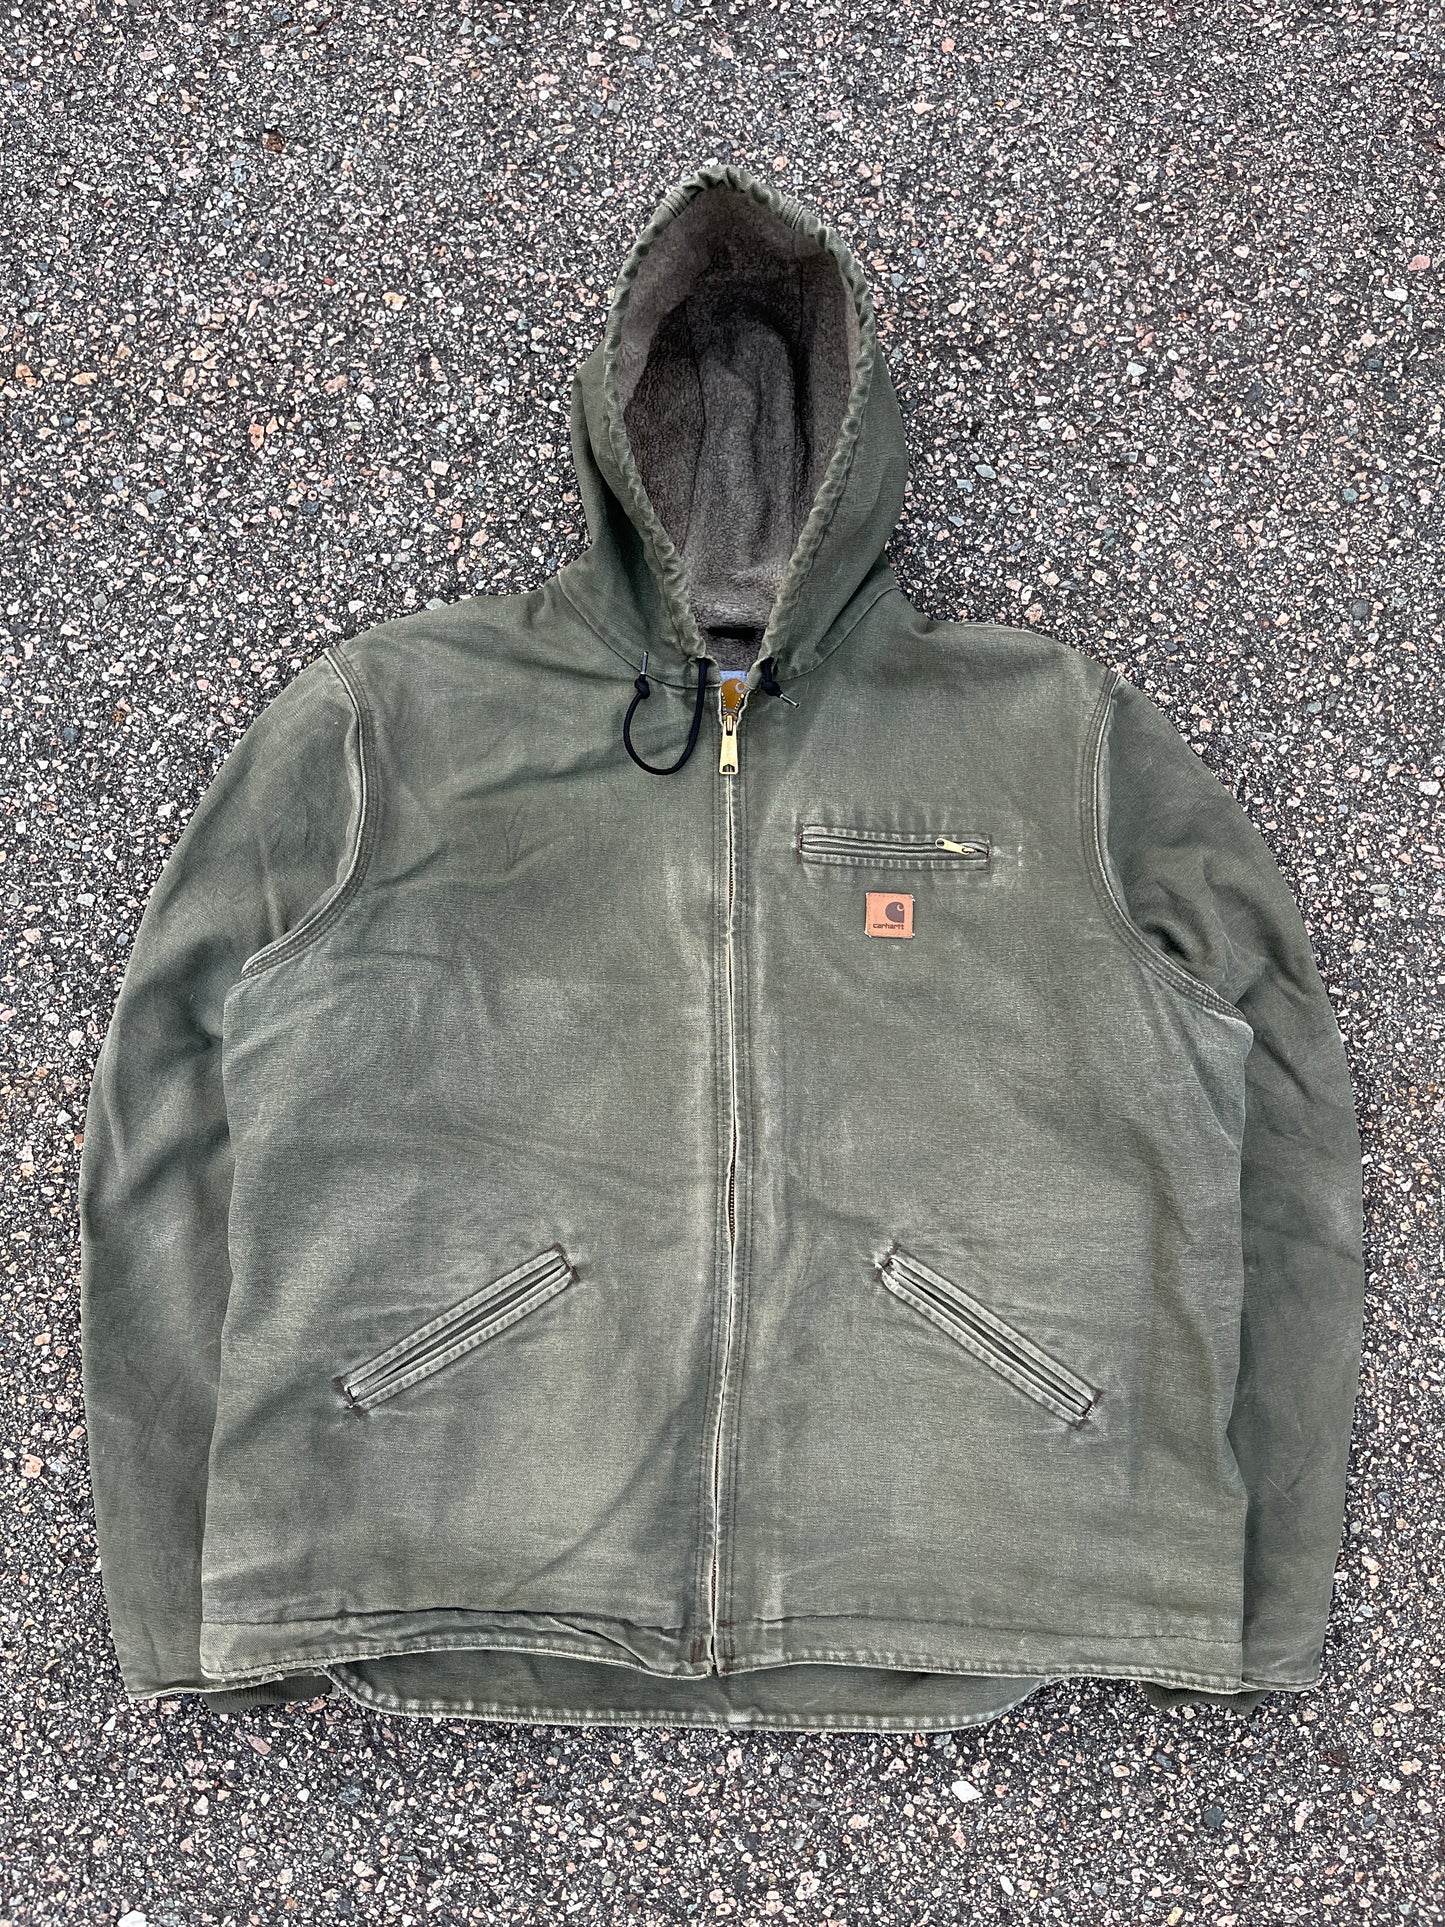 Faded Olive Green Carhartt Sherpa Lined Jacket - 2XL